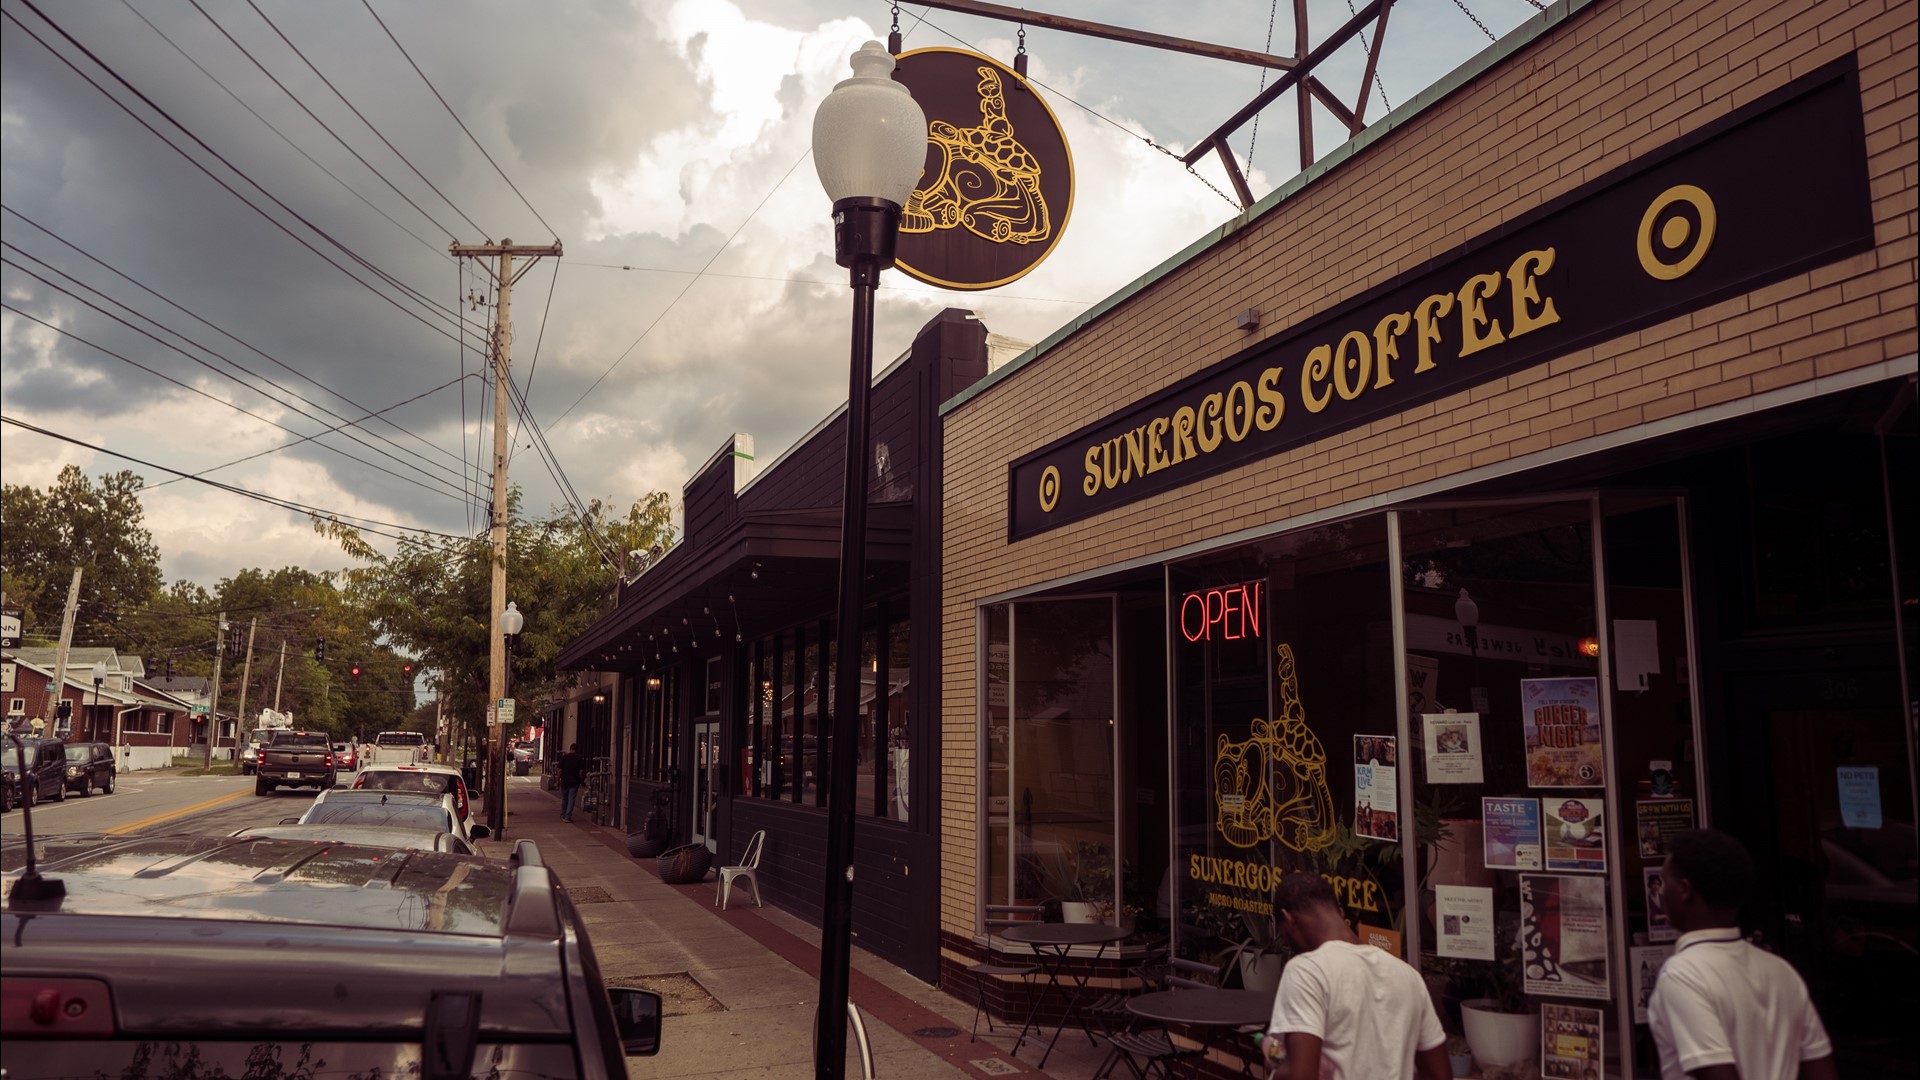 Sunergos Coffee employees are the most recent baristas who want to unionize in the metro.